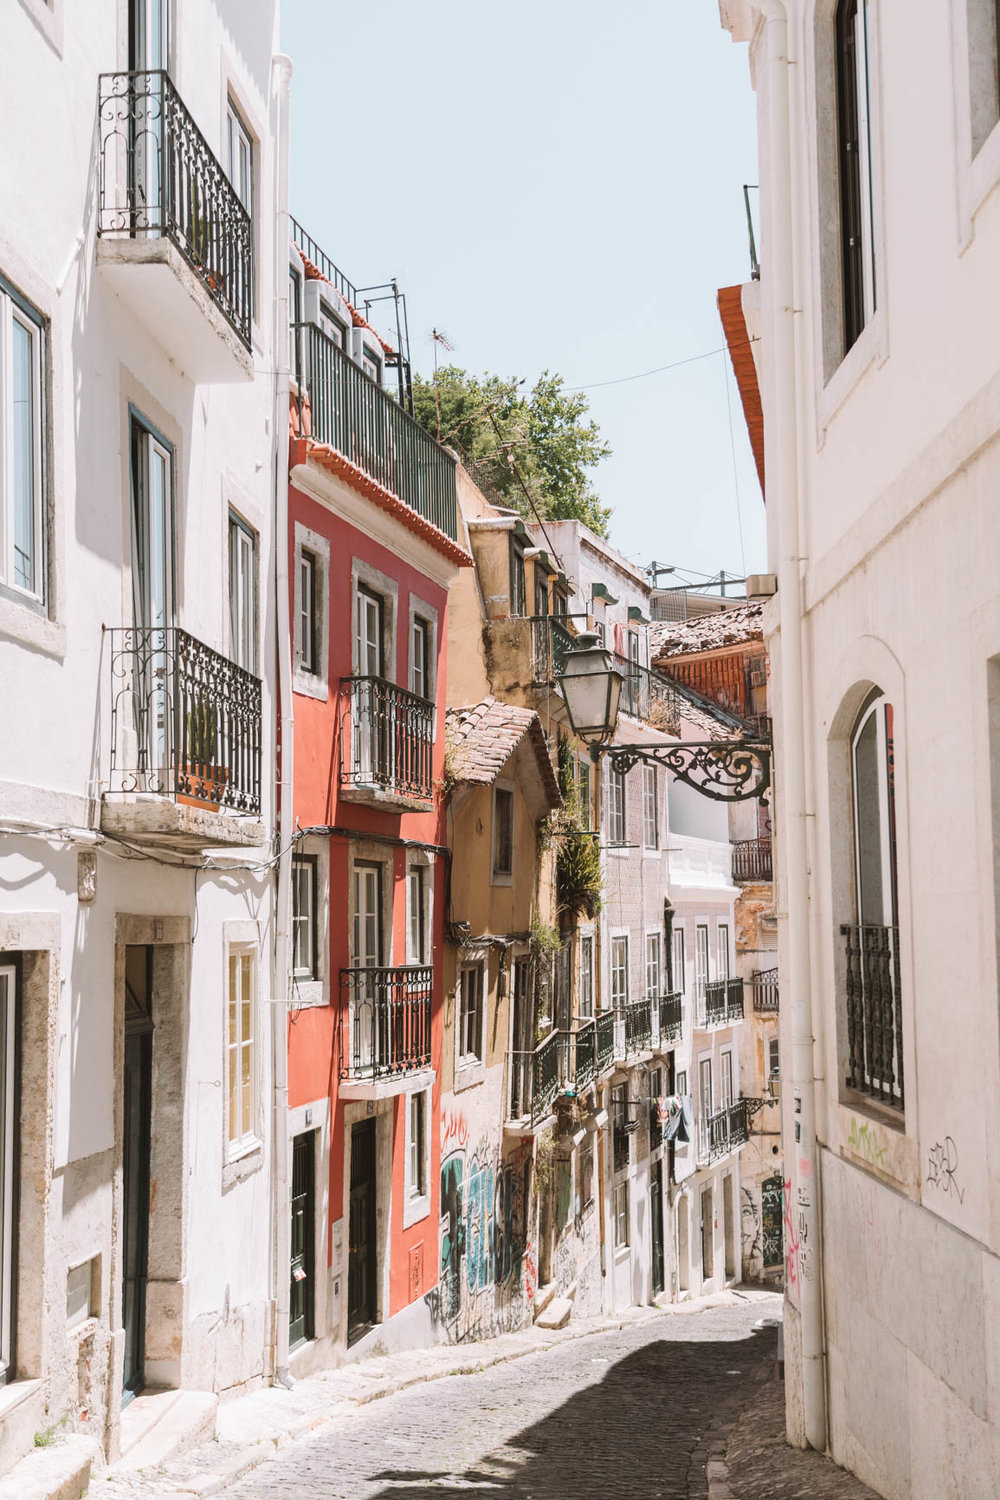 2 -3 Days Itinerary in Lisbon Portugal - Everything you need to know including where to eat, where to stay, and fun things to do in #Lisbon #Portugal